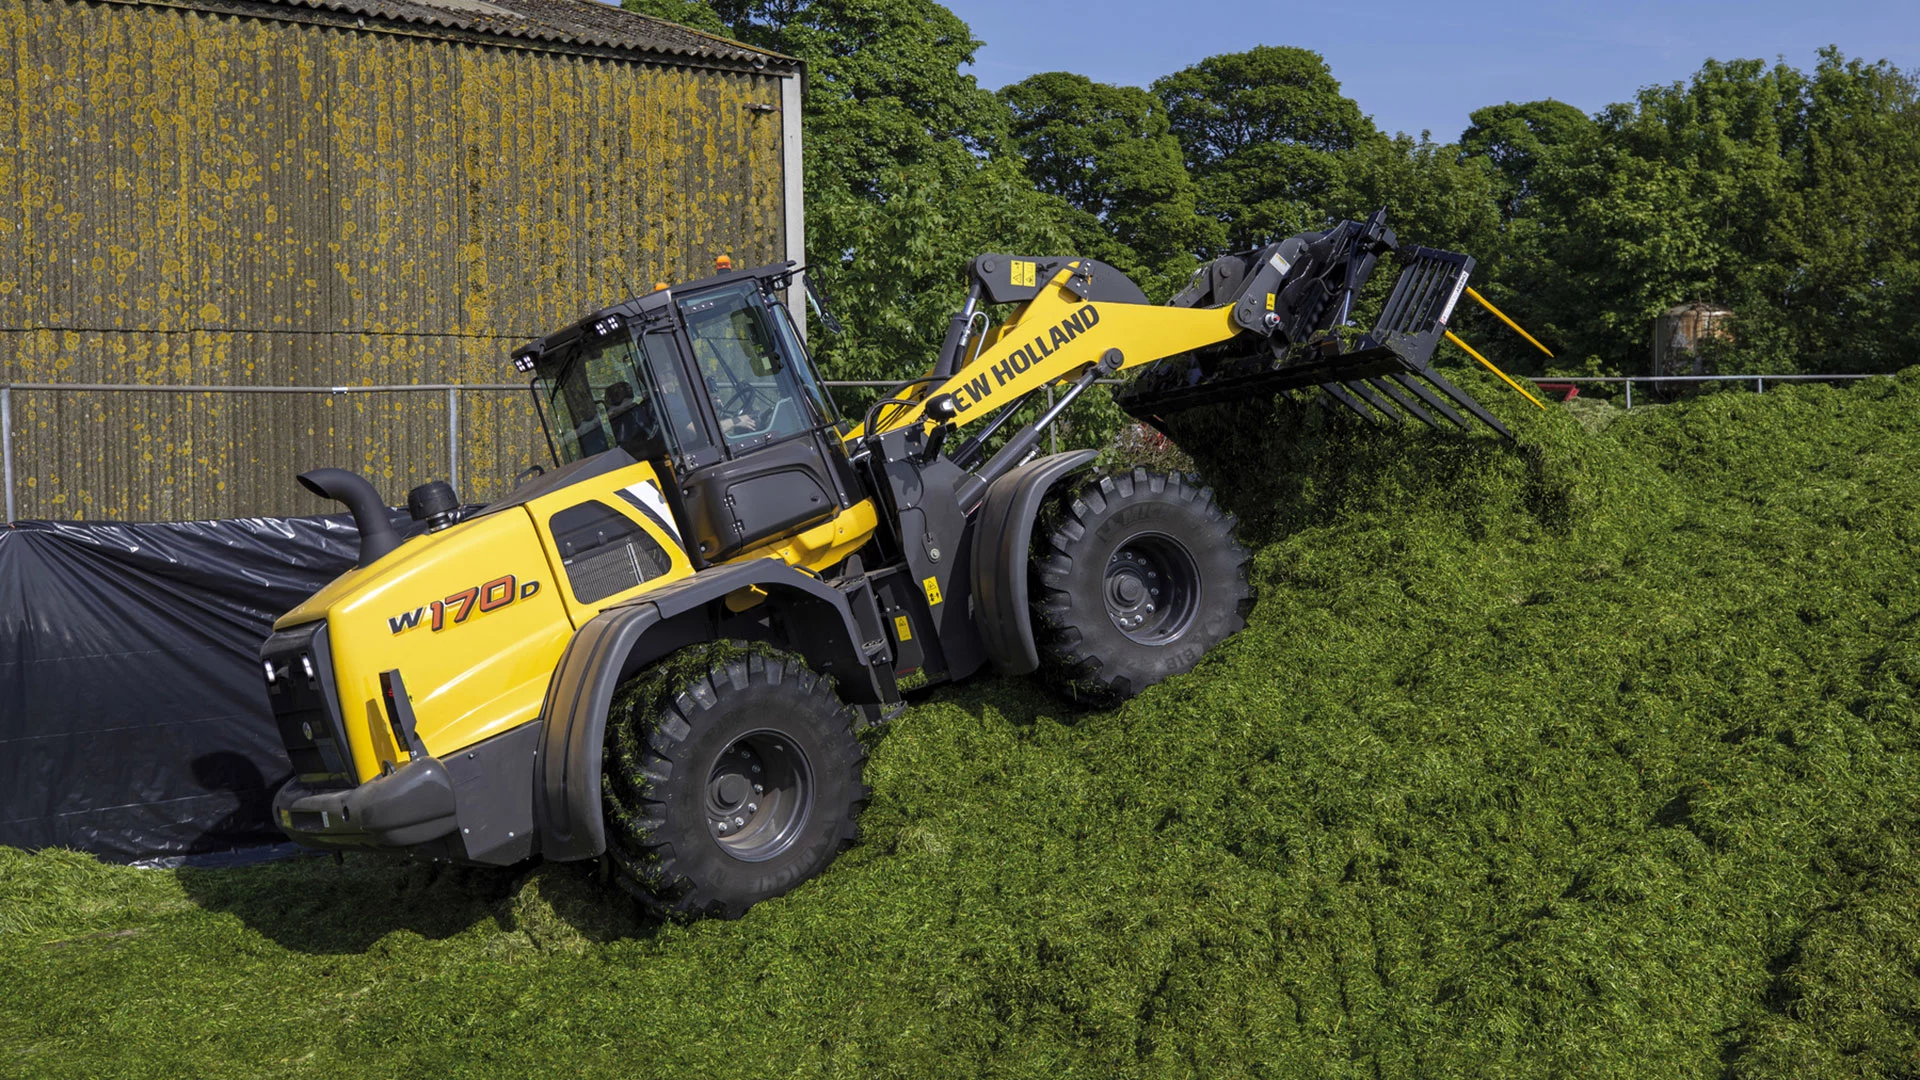 New Holland W170D wheel loader in action, lifting fresh green silage against a clear blue sky.